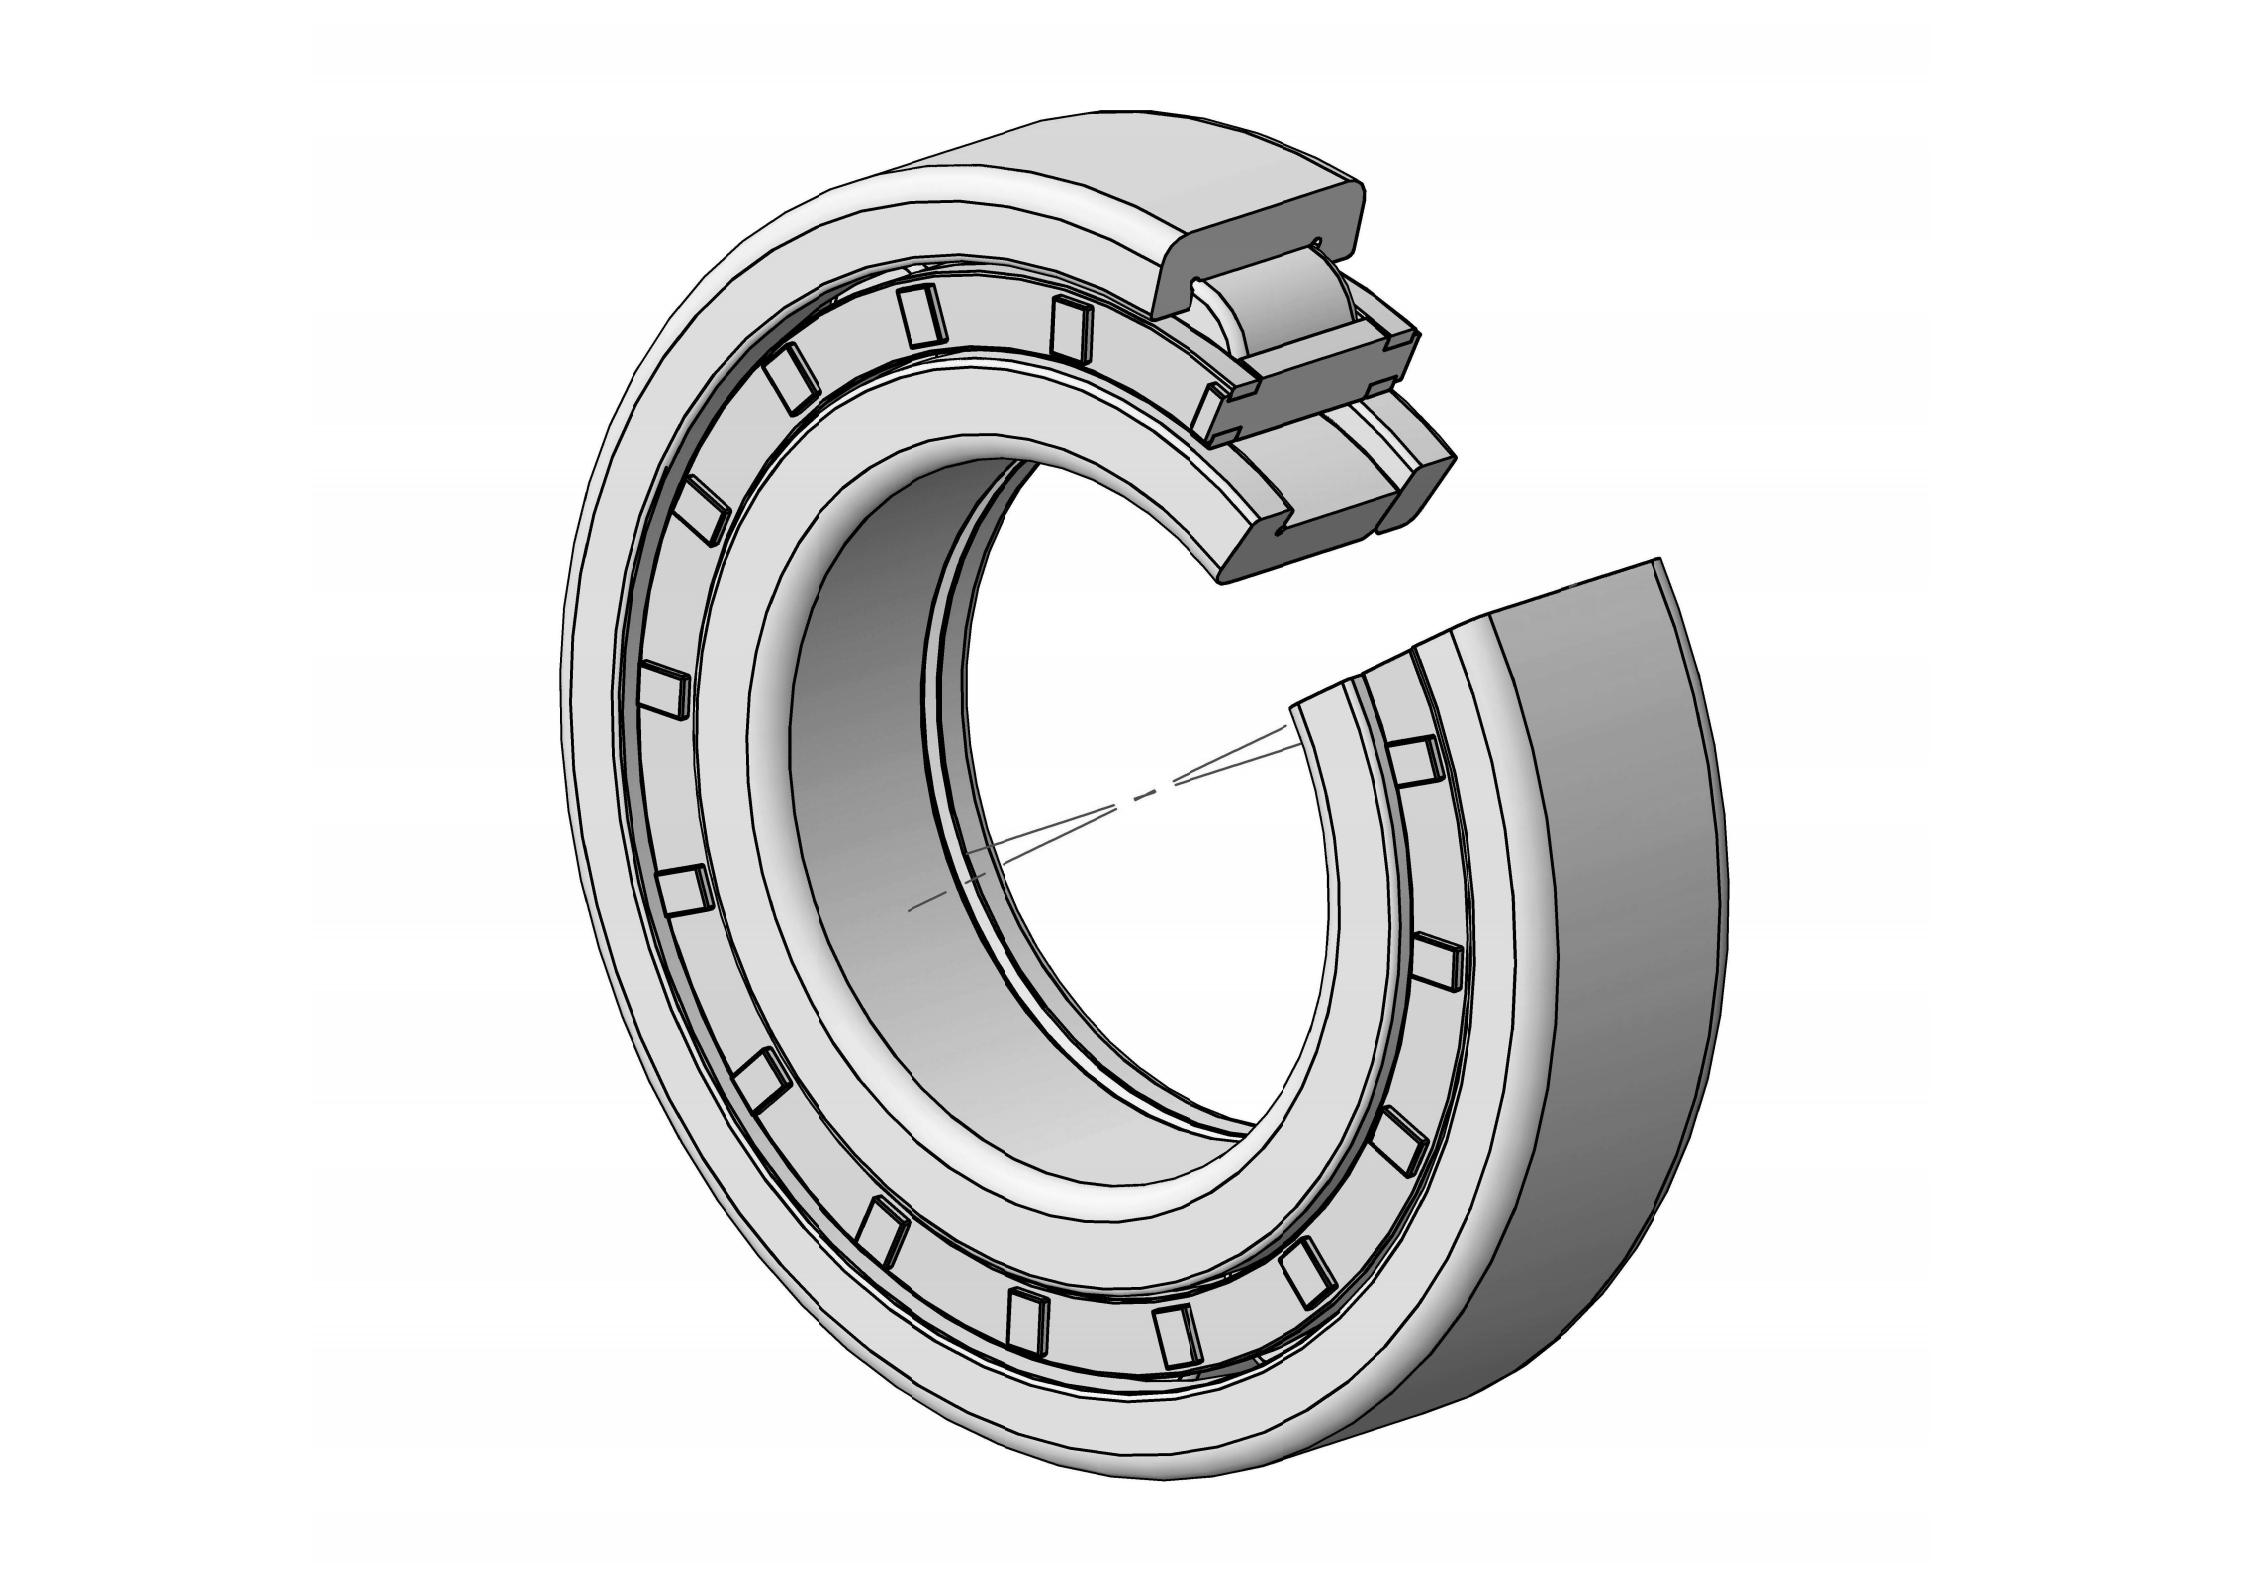 NUP211-E Single Row Cylindrical roller bearing 